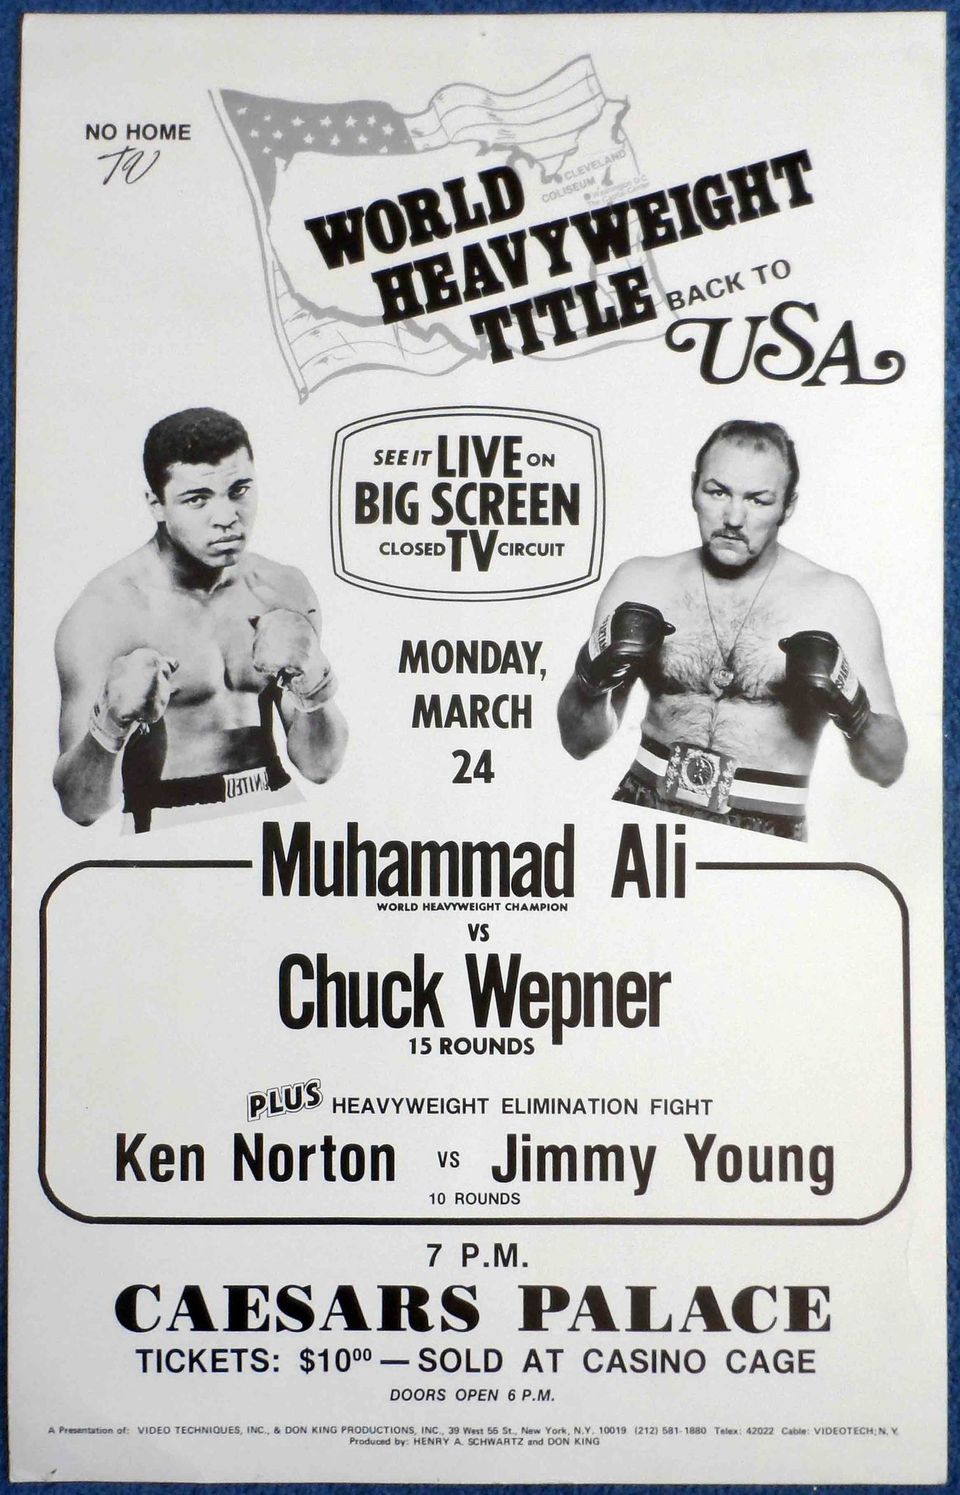 A poster of Muhammad Ali vs. Chuck Wepner boxing match